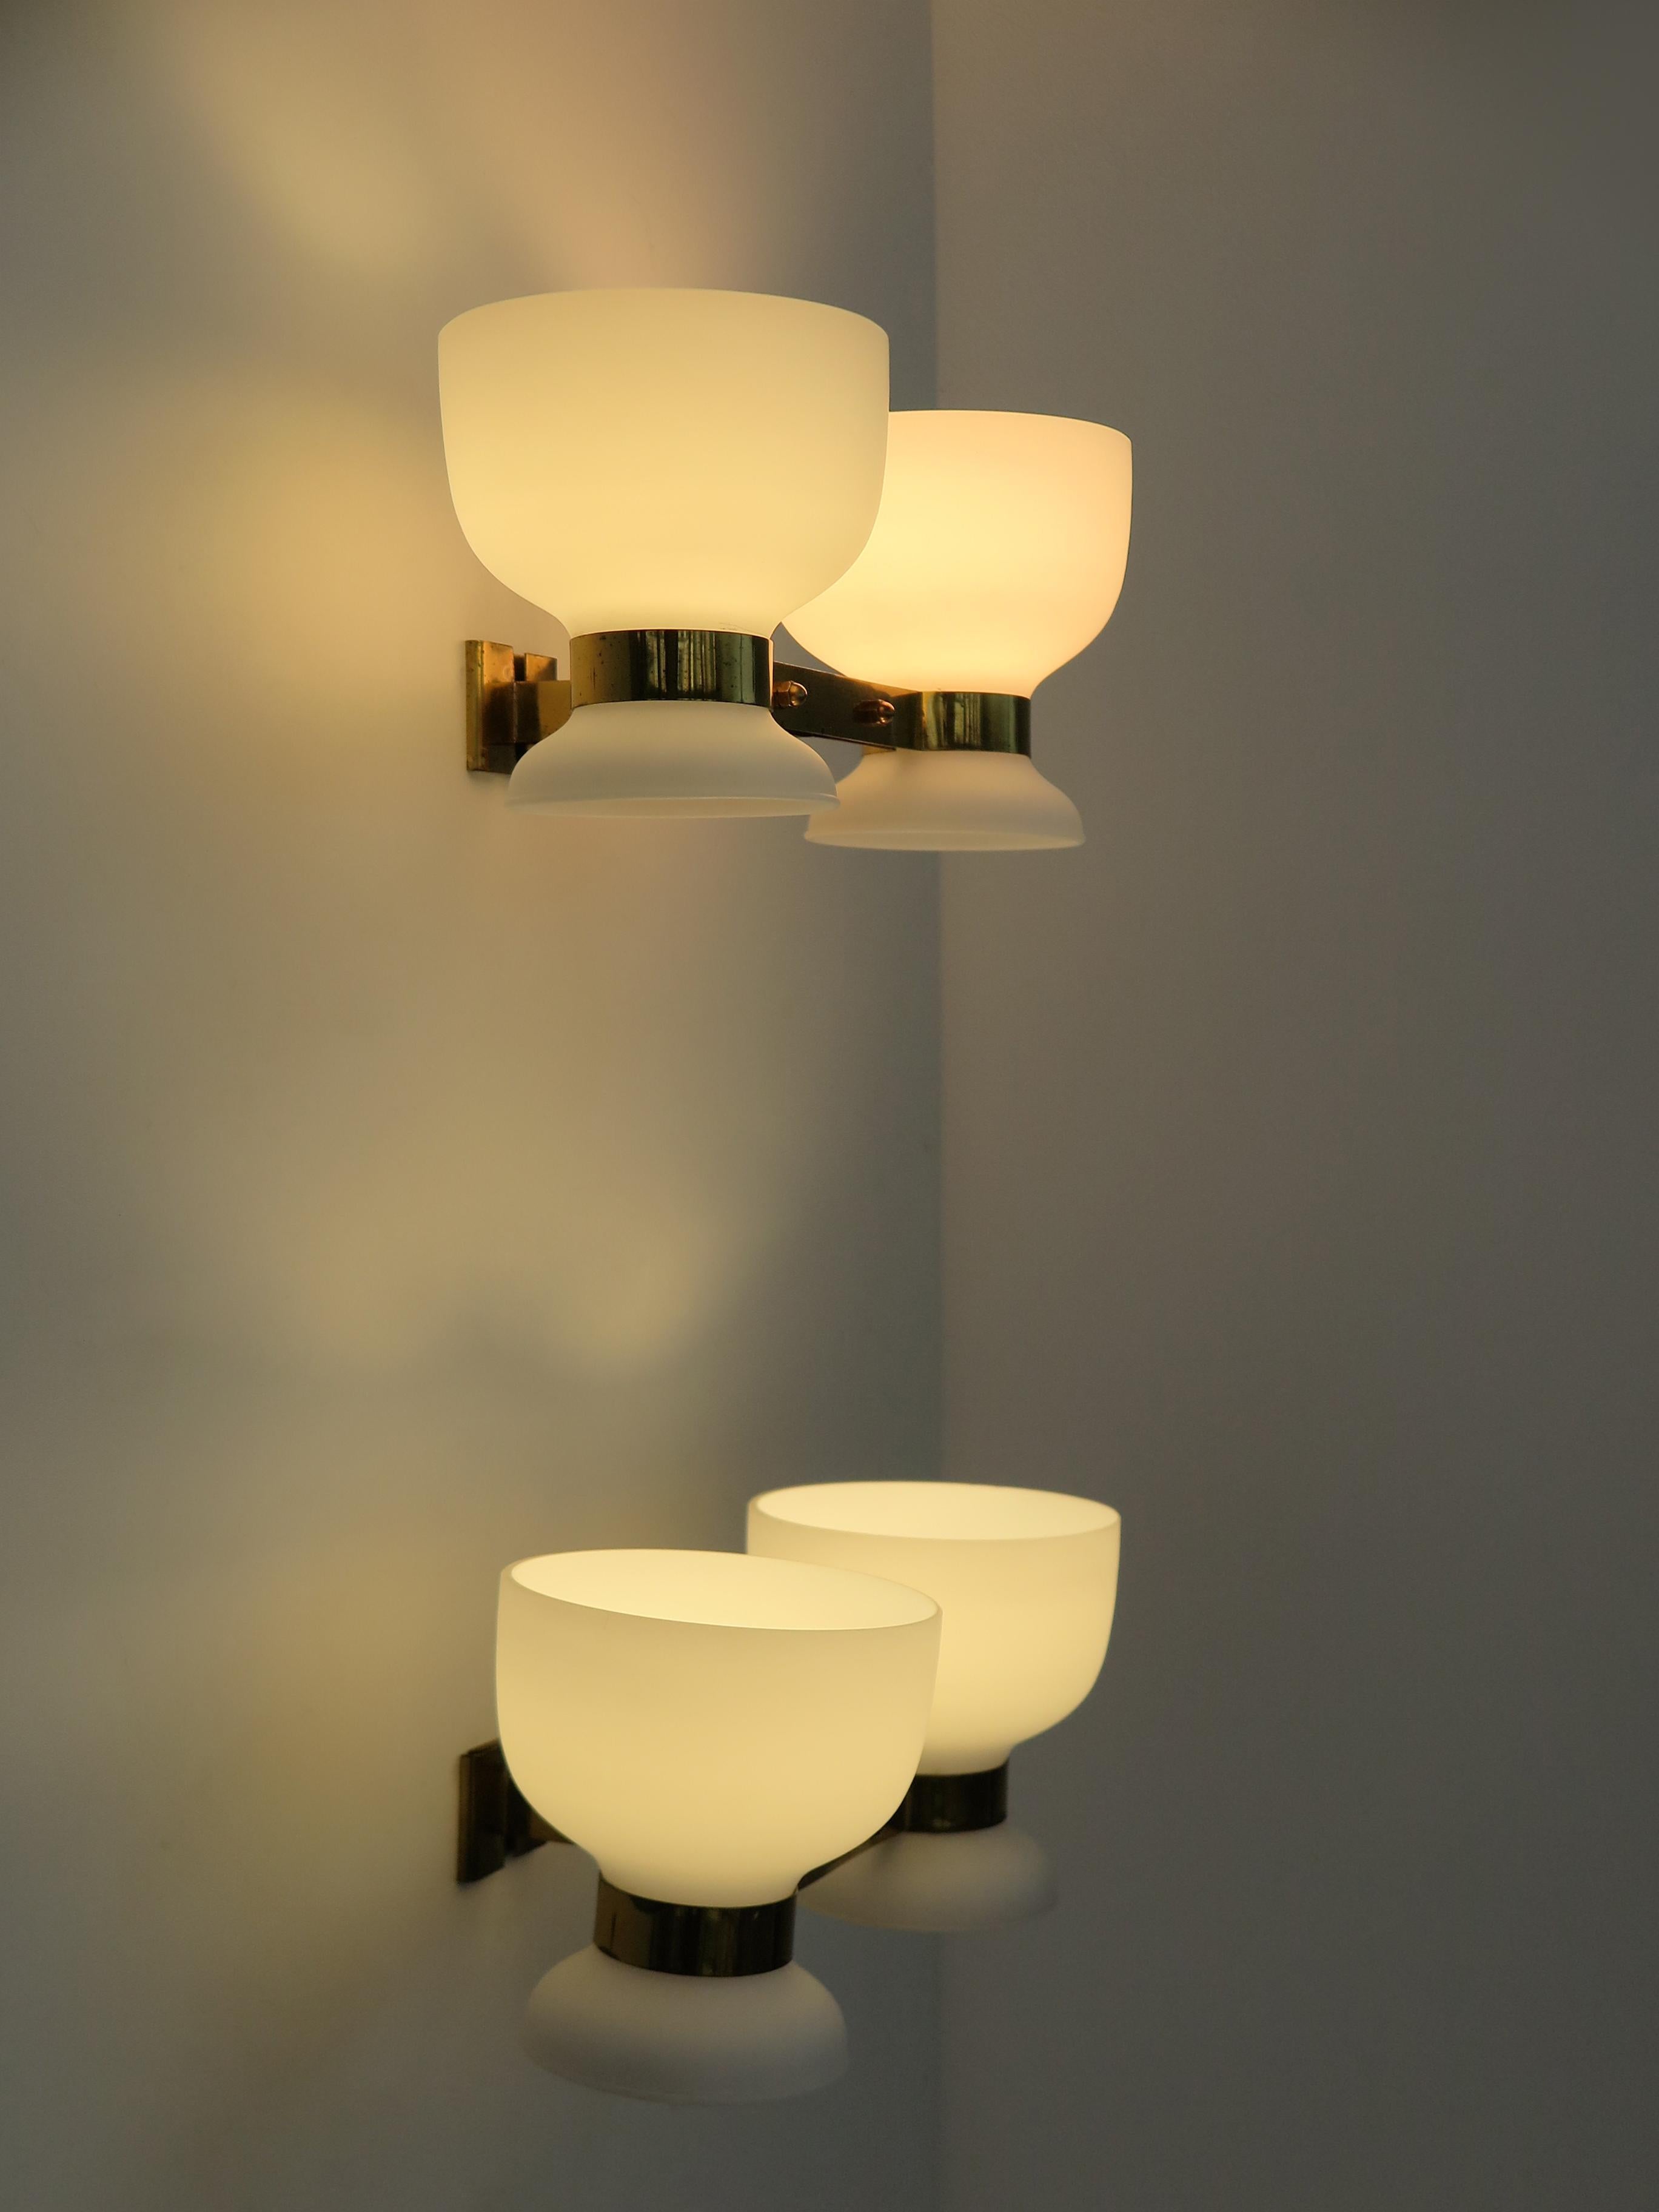 Pair of wall lamps wall sconces produced by Stilnovo with opaque white glass diffusers and brass srtructure, 1950s Italy production

Note that the lamp is original to the period and shows the normal signs of age and use.